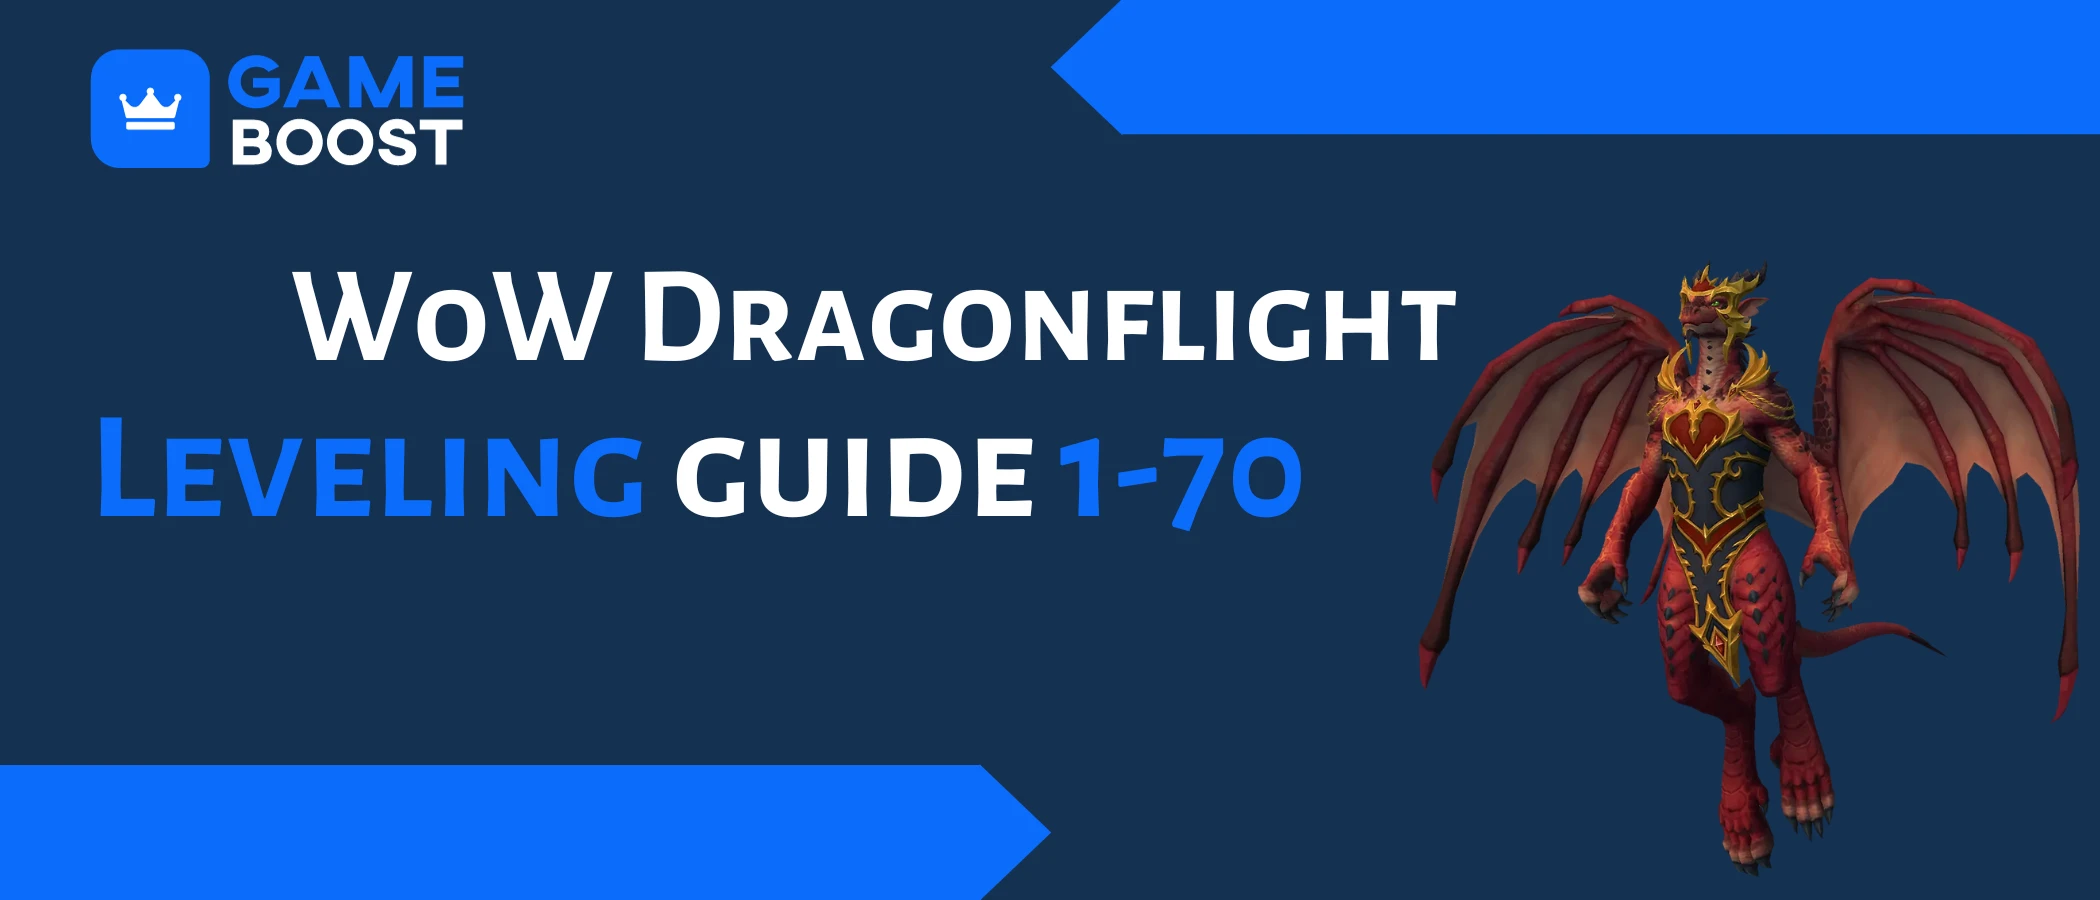 WoW Dragonflight Leveling guide 1-70